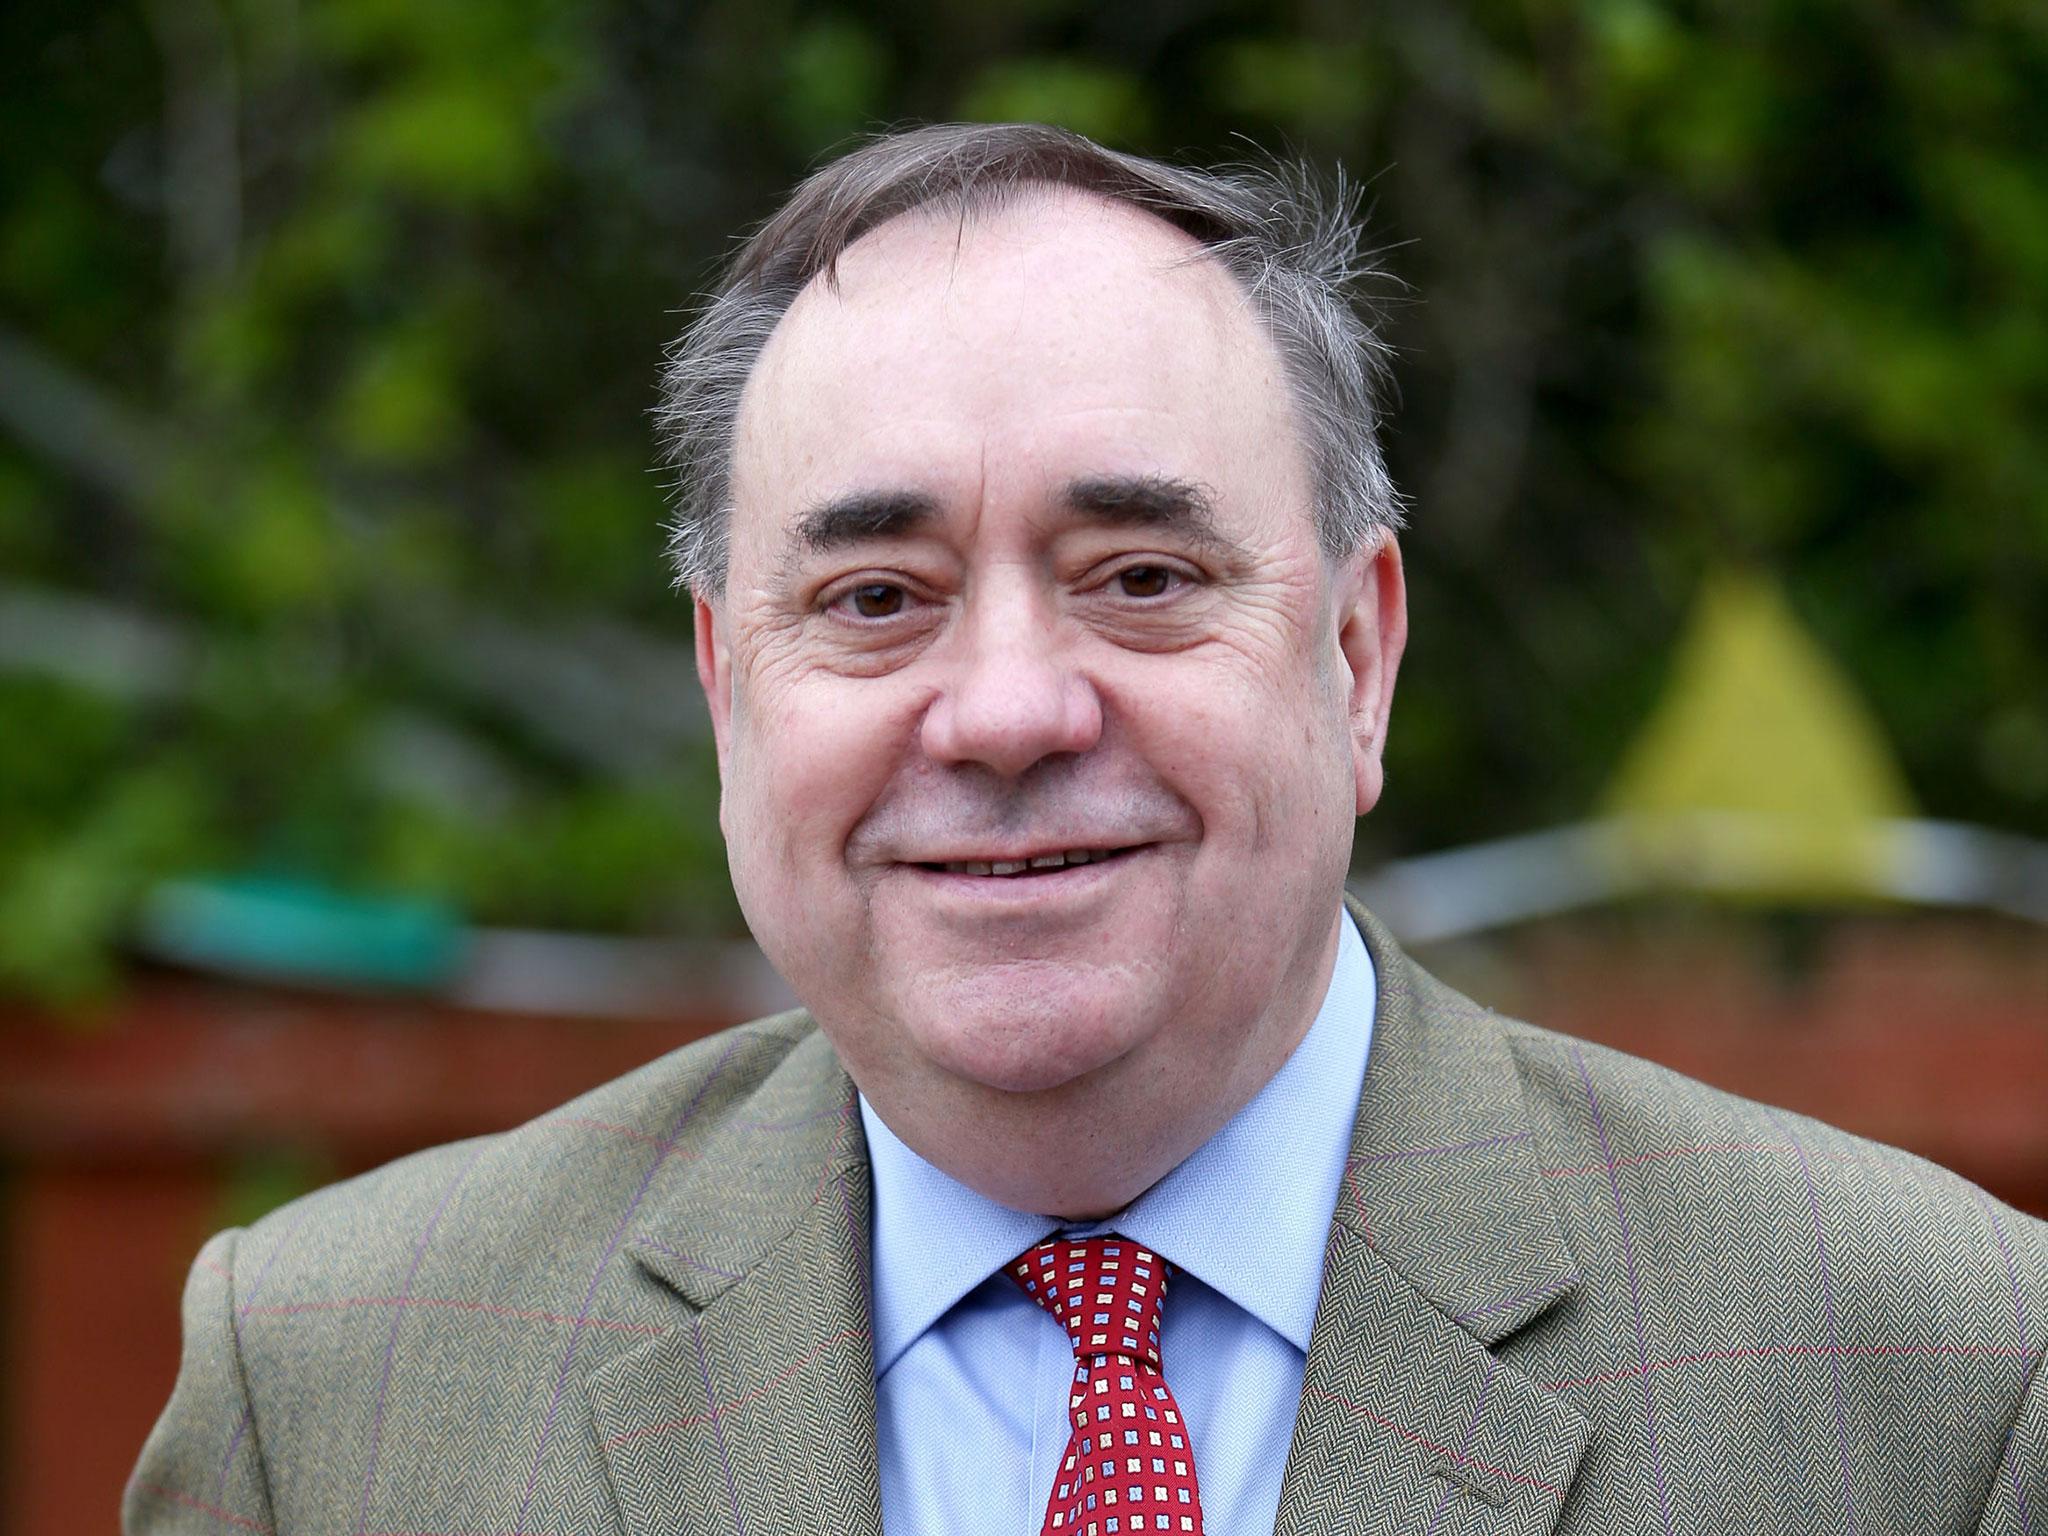 Alex Salmond believes the appetite for Scottish independence will return once Brexit has fully played out